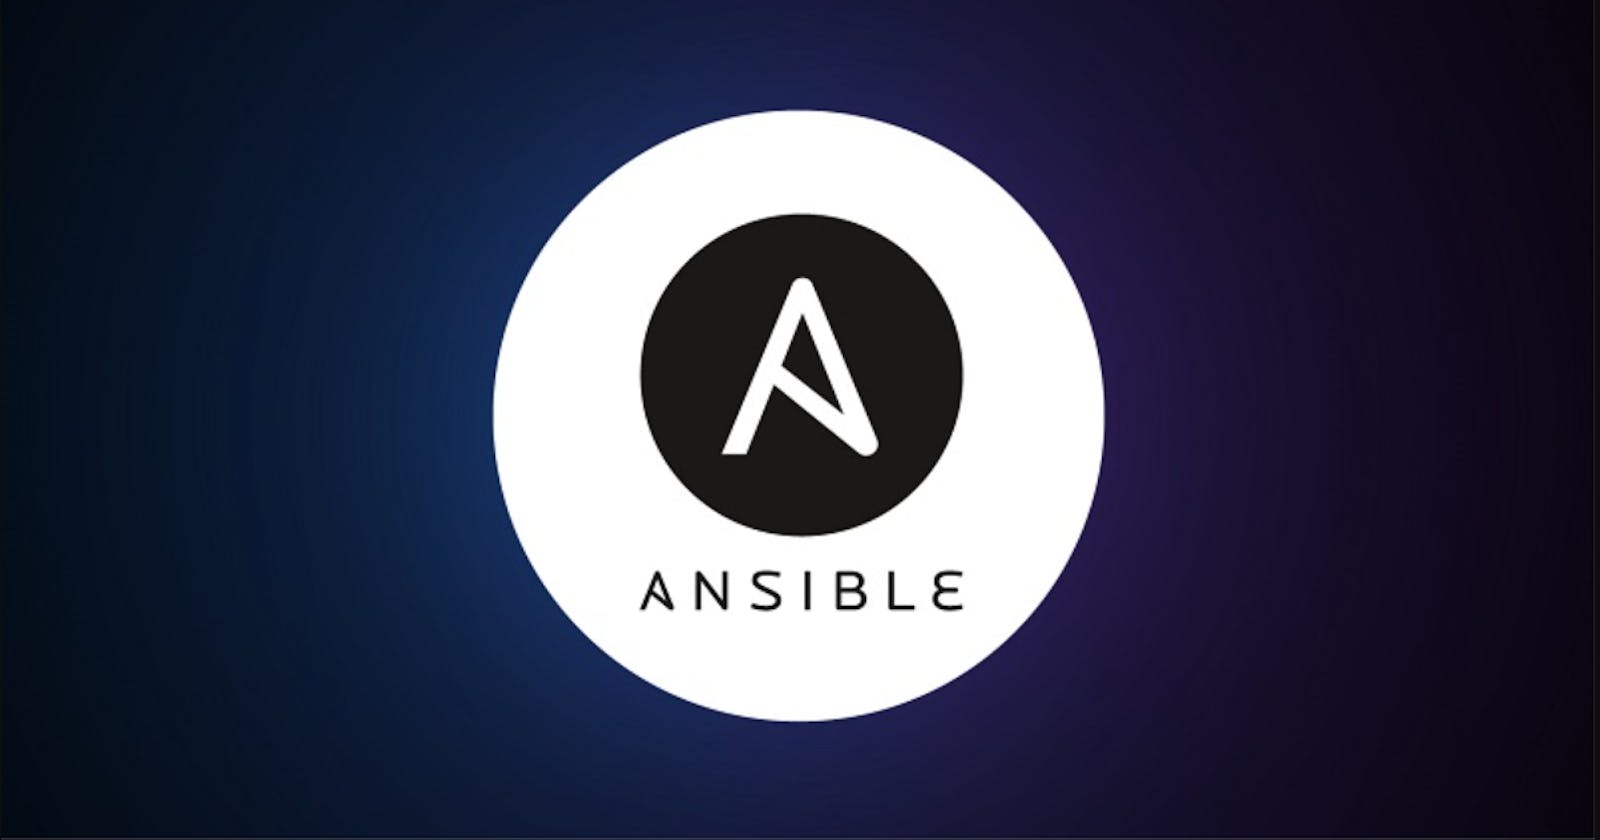 DevOps Interview: Ansible Vaults Commands and Usuage